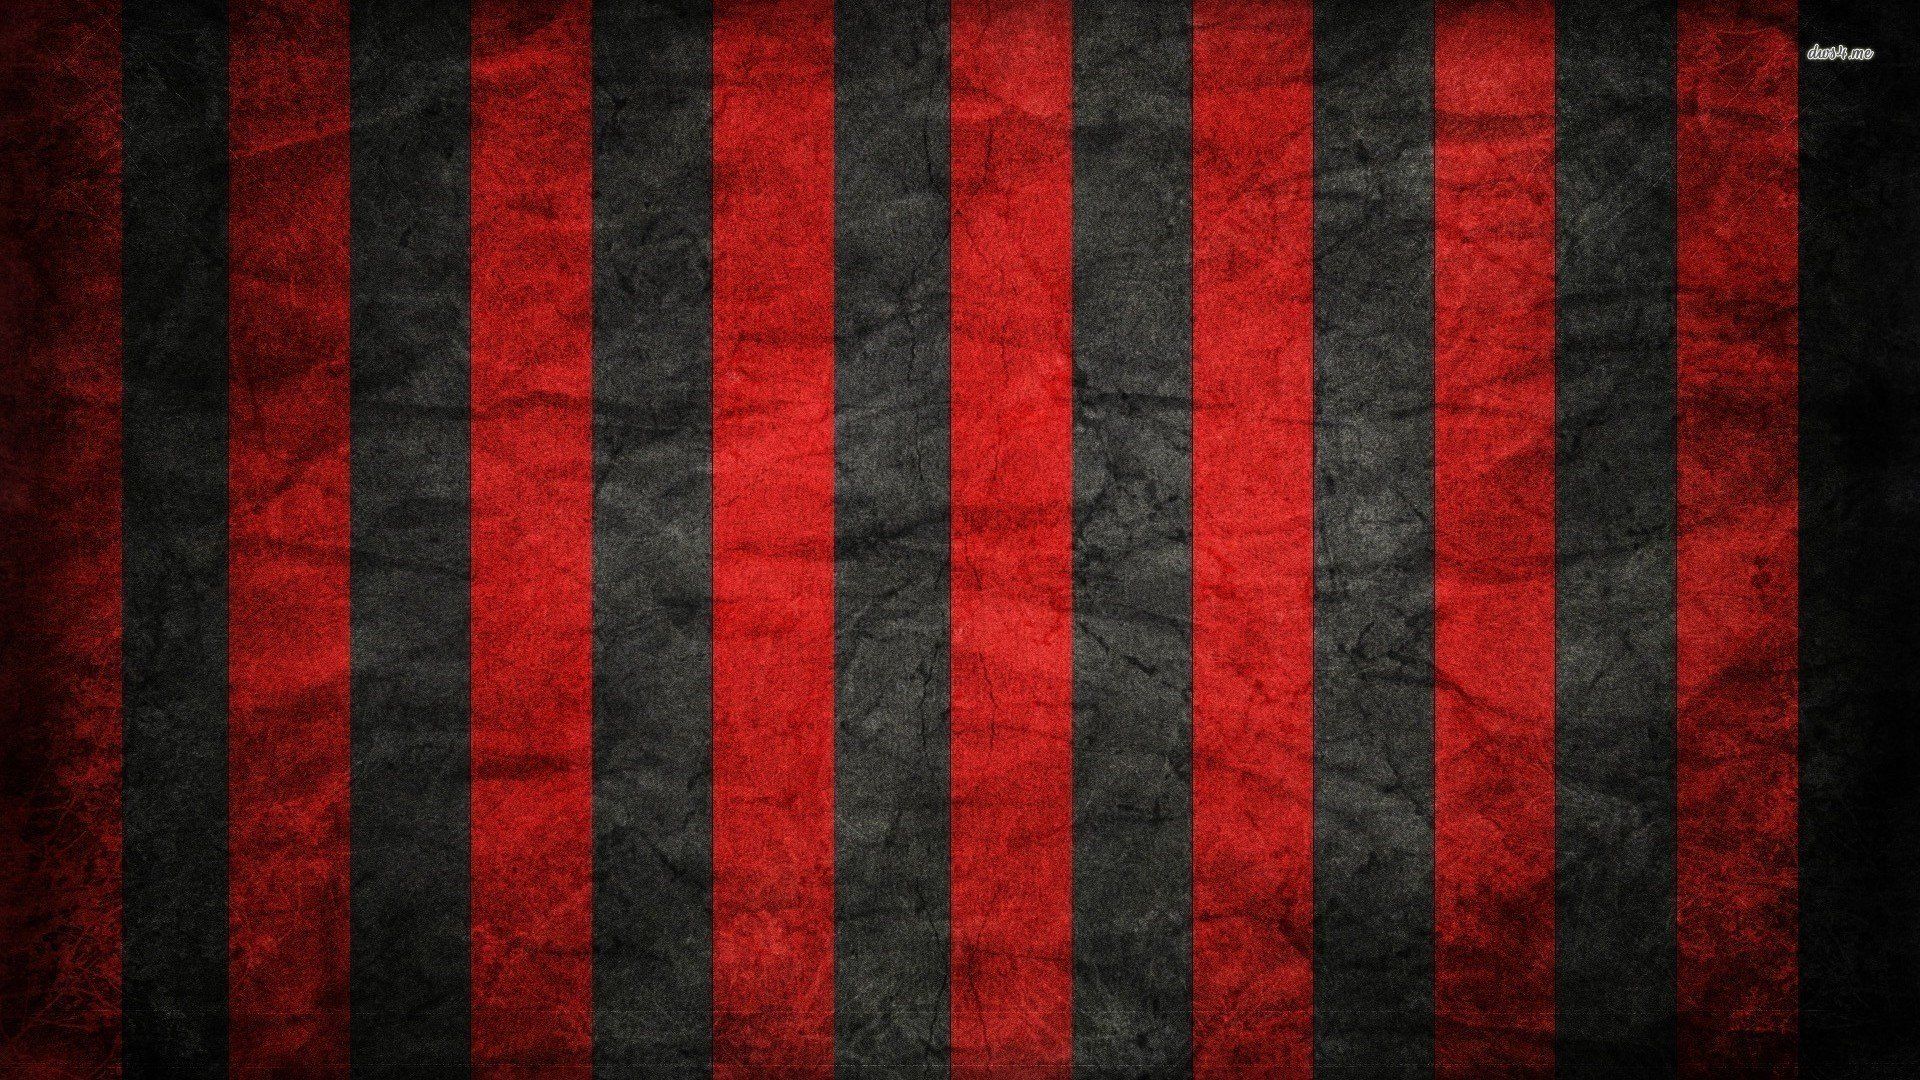 Black And Red Abstract wallpaper 1920x1080 584198 WallpaperUP